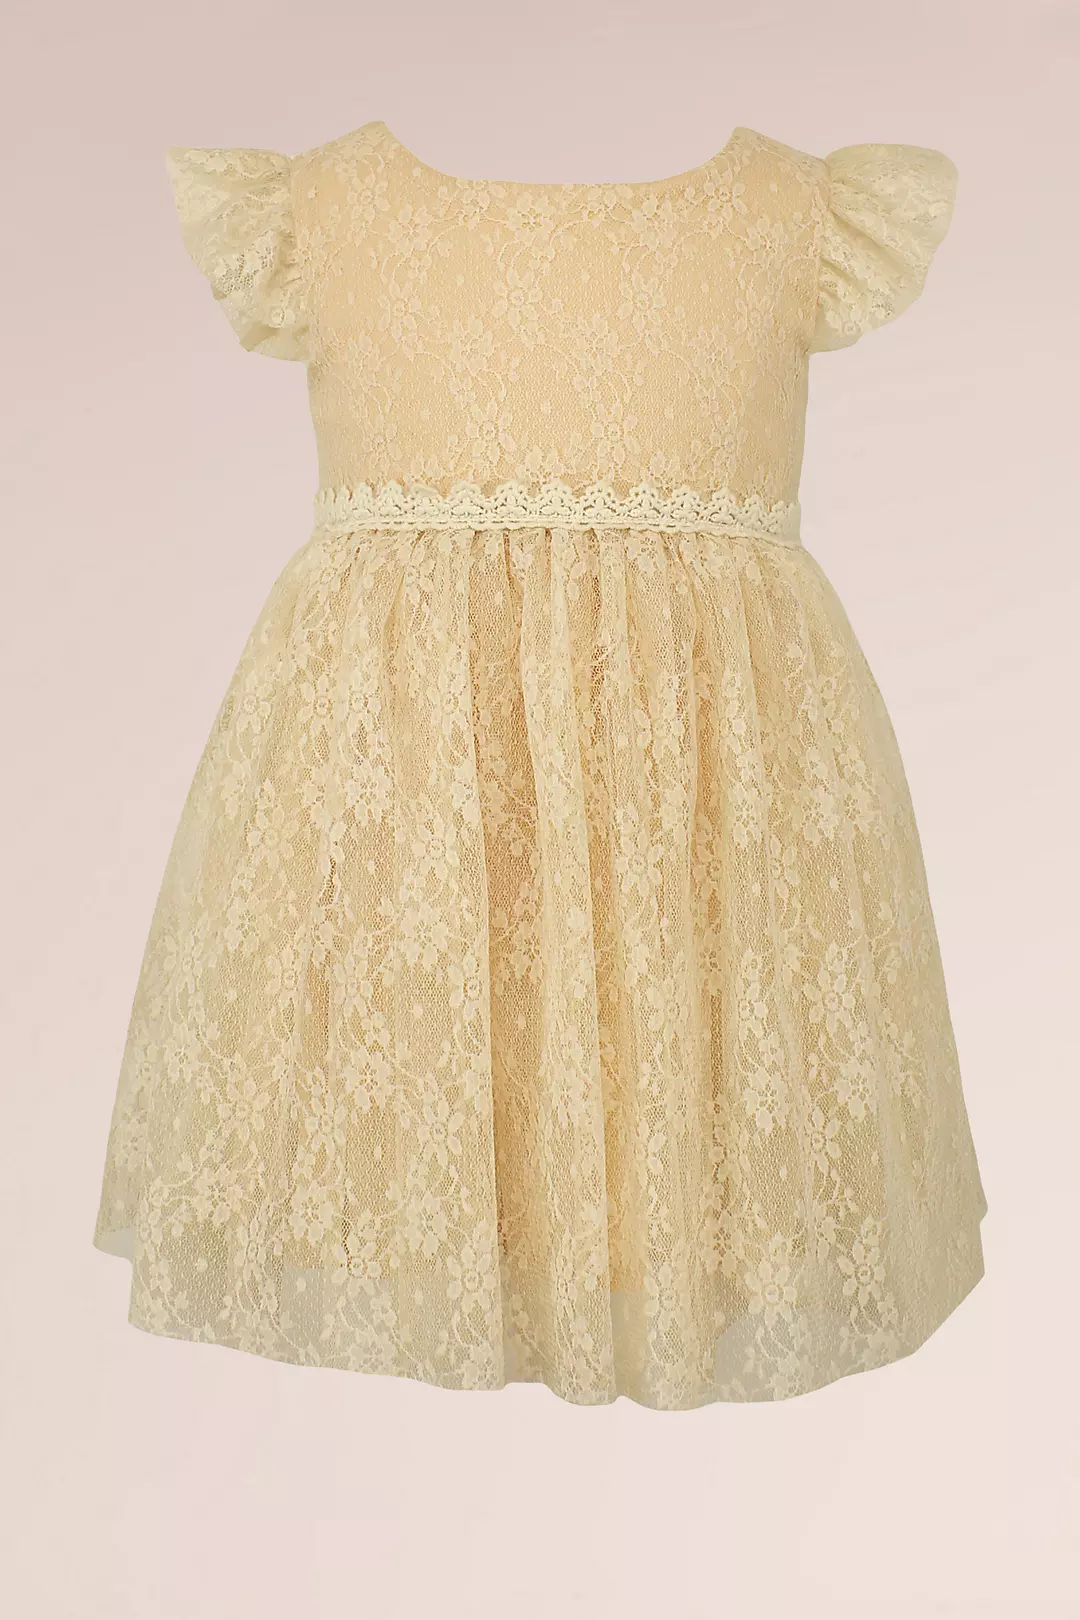 Floral Lace Flower Girl Dress with Cap Sleeves Image